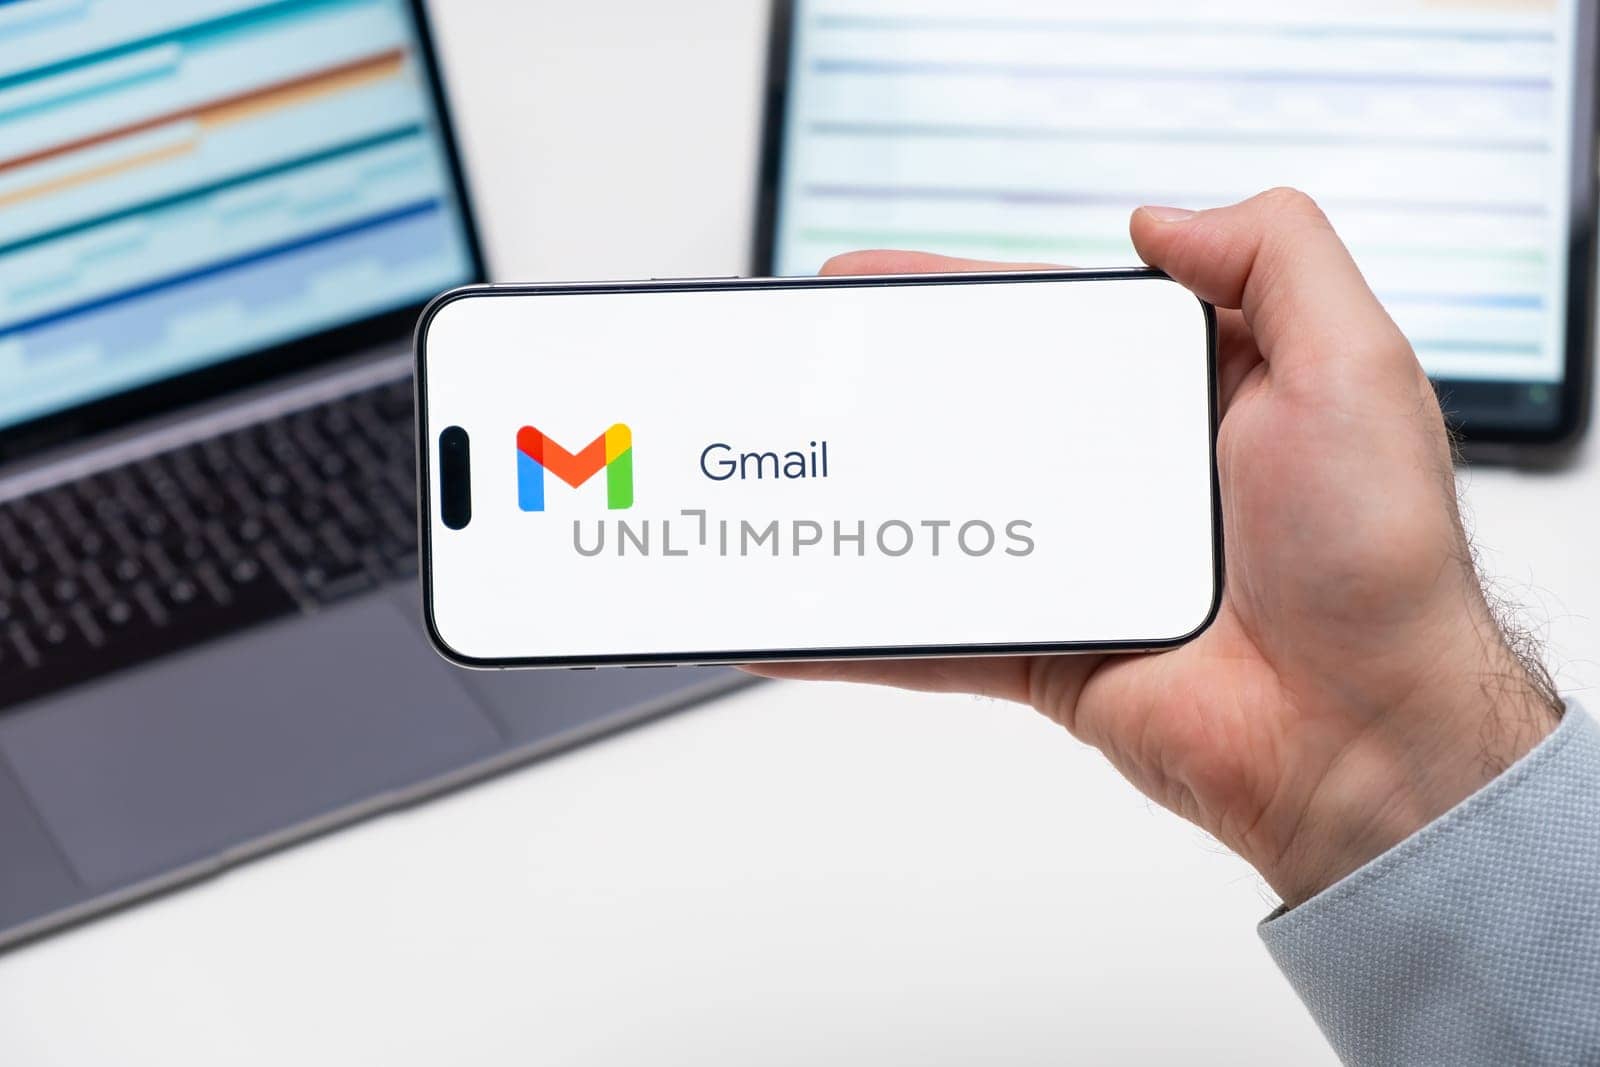 Gmail application logo on the screen of smart phone in mans hand, laptop and tablet on the table by vladimka